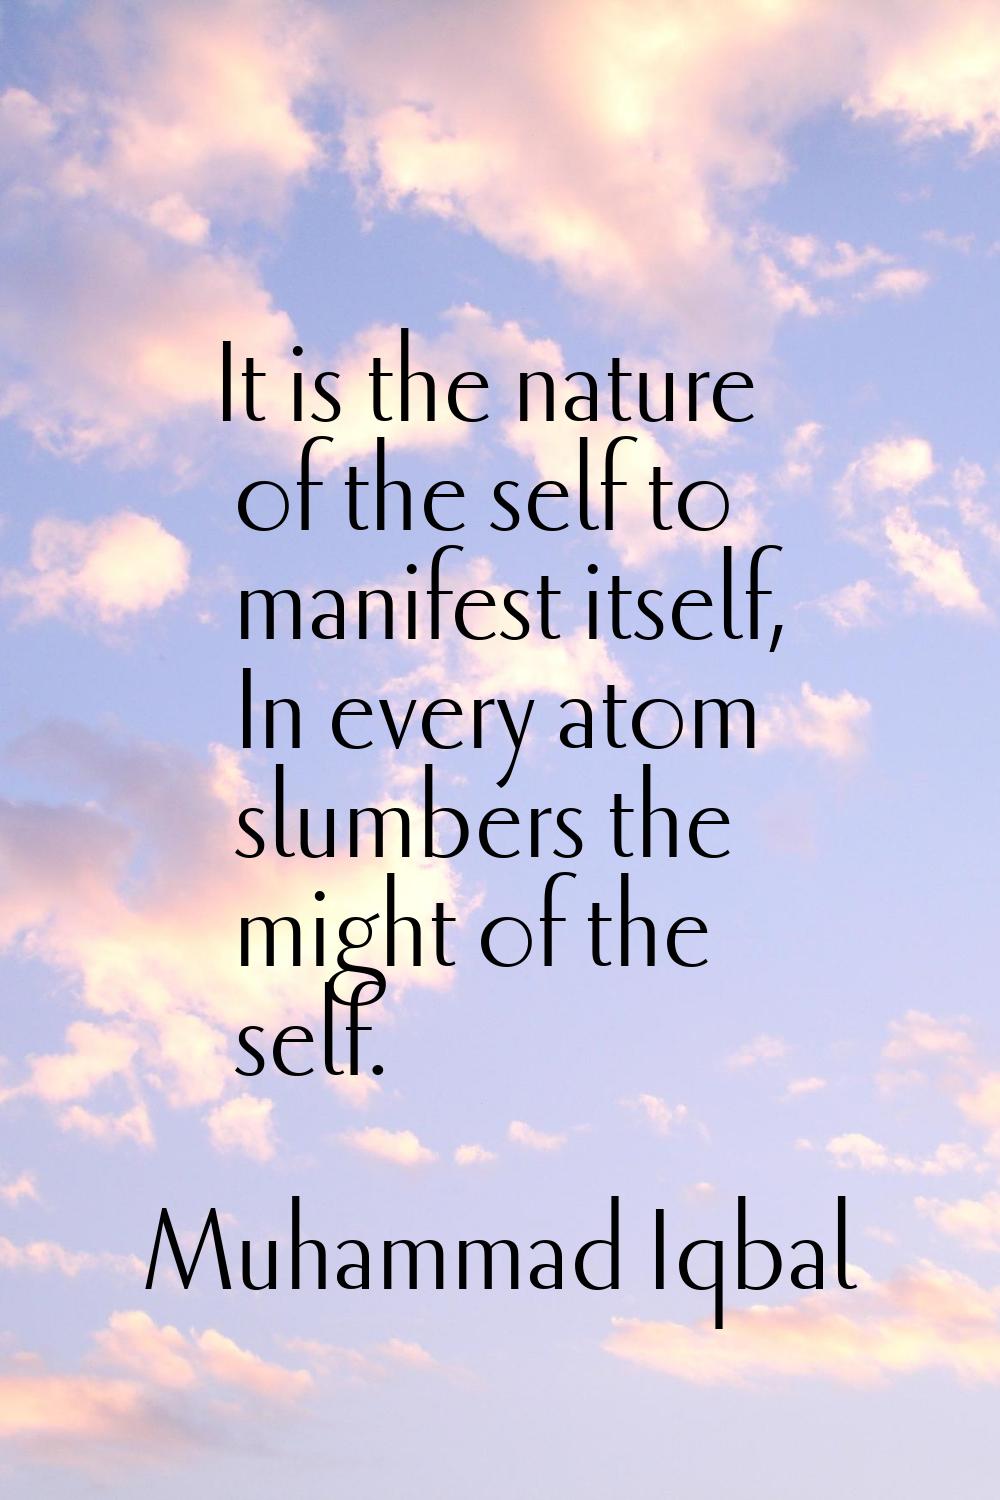 It is the nature of the self to manifest itself, In every atom slumbers the might of the self.